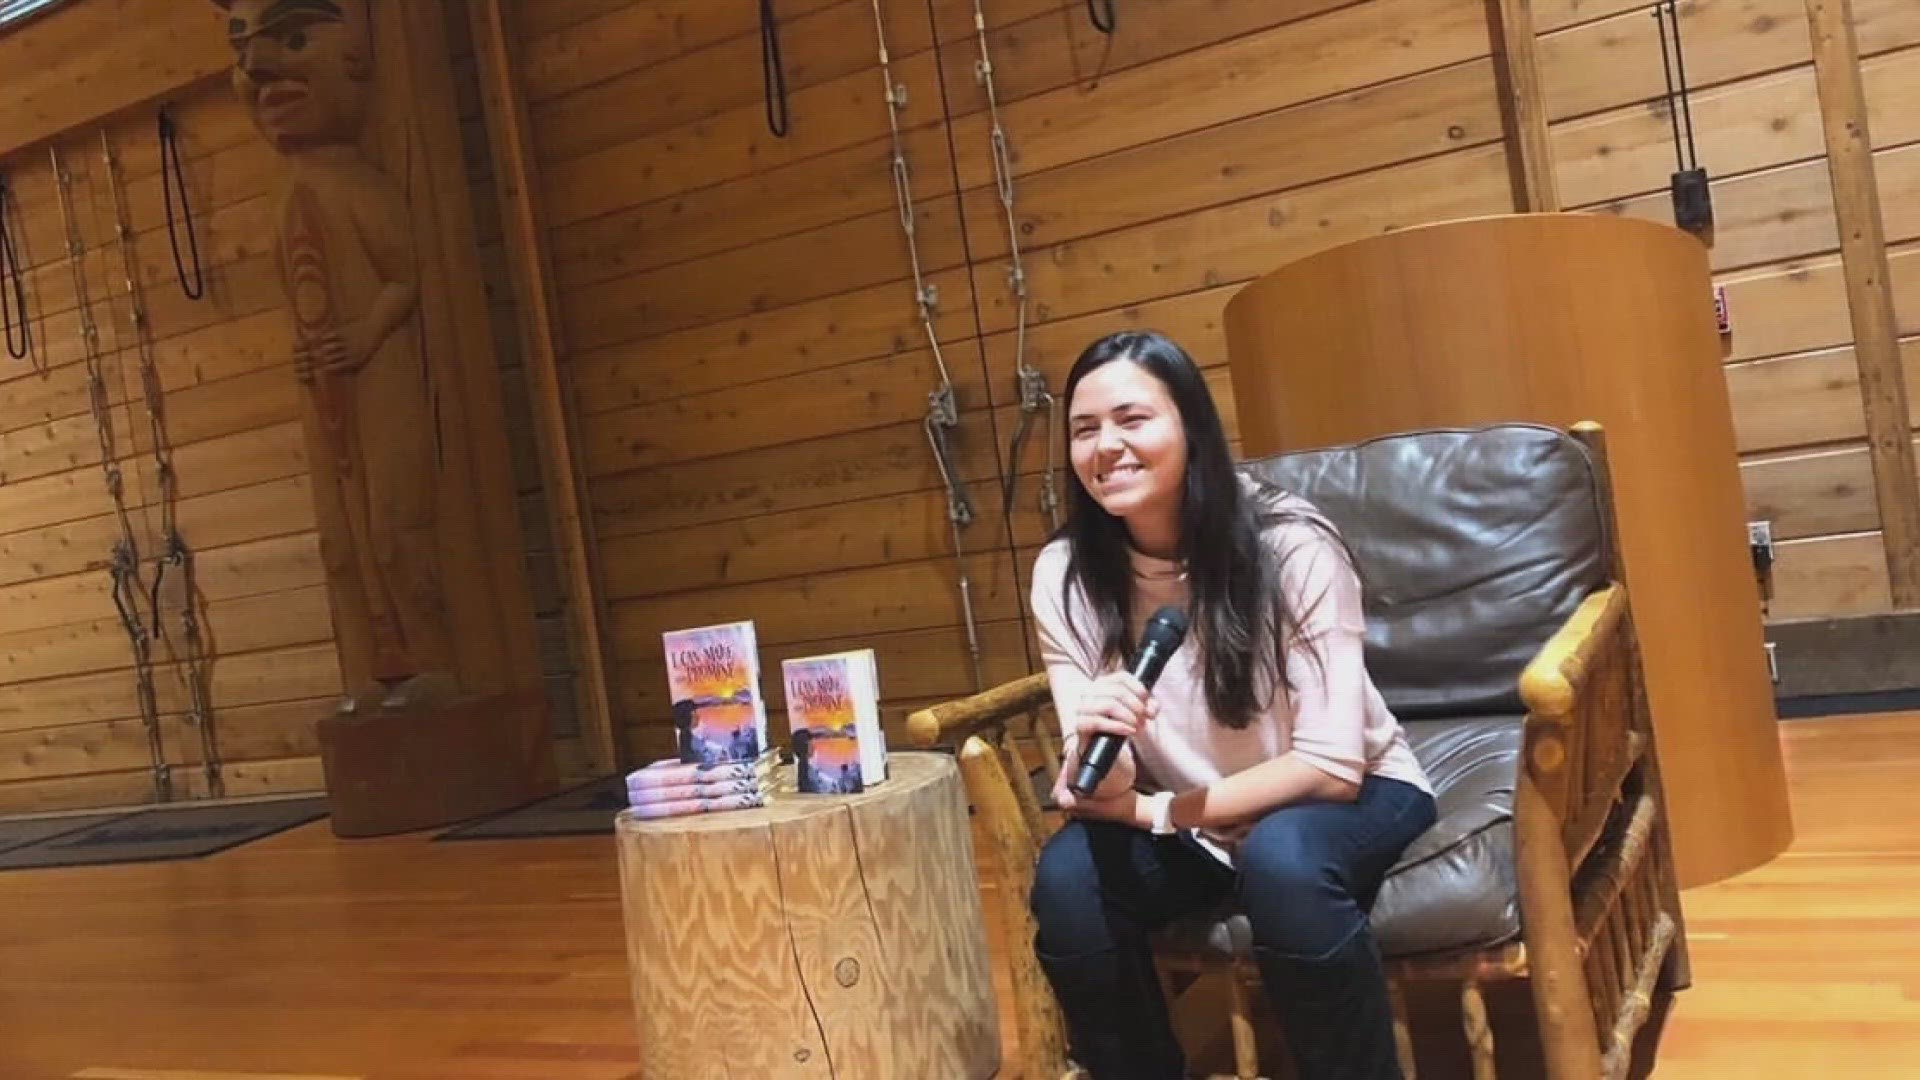 The month of November is Native American Heritage Month. KING 5 Weekend Mornings has been hosting indigenous artists and entrepreneurs to hear their stories.